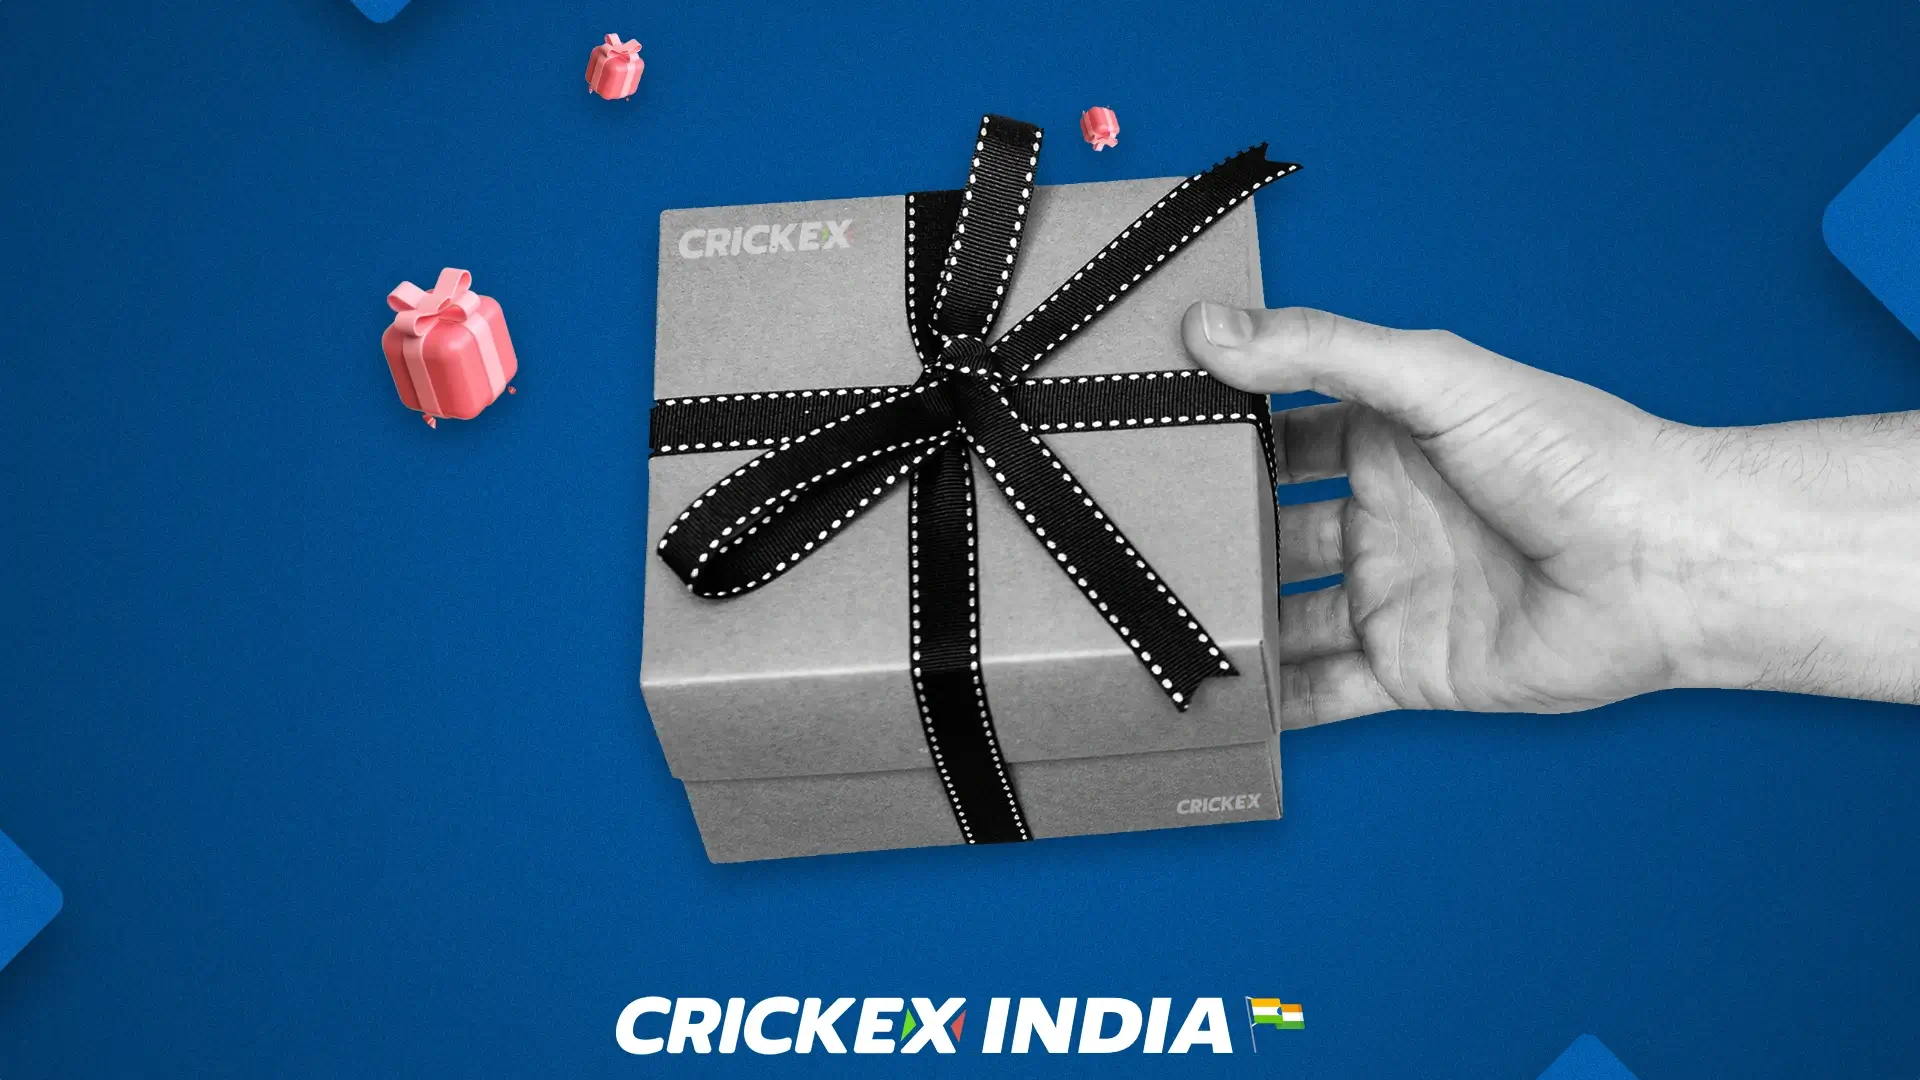 Crickex welcome bonus for new players from India